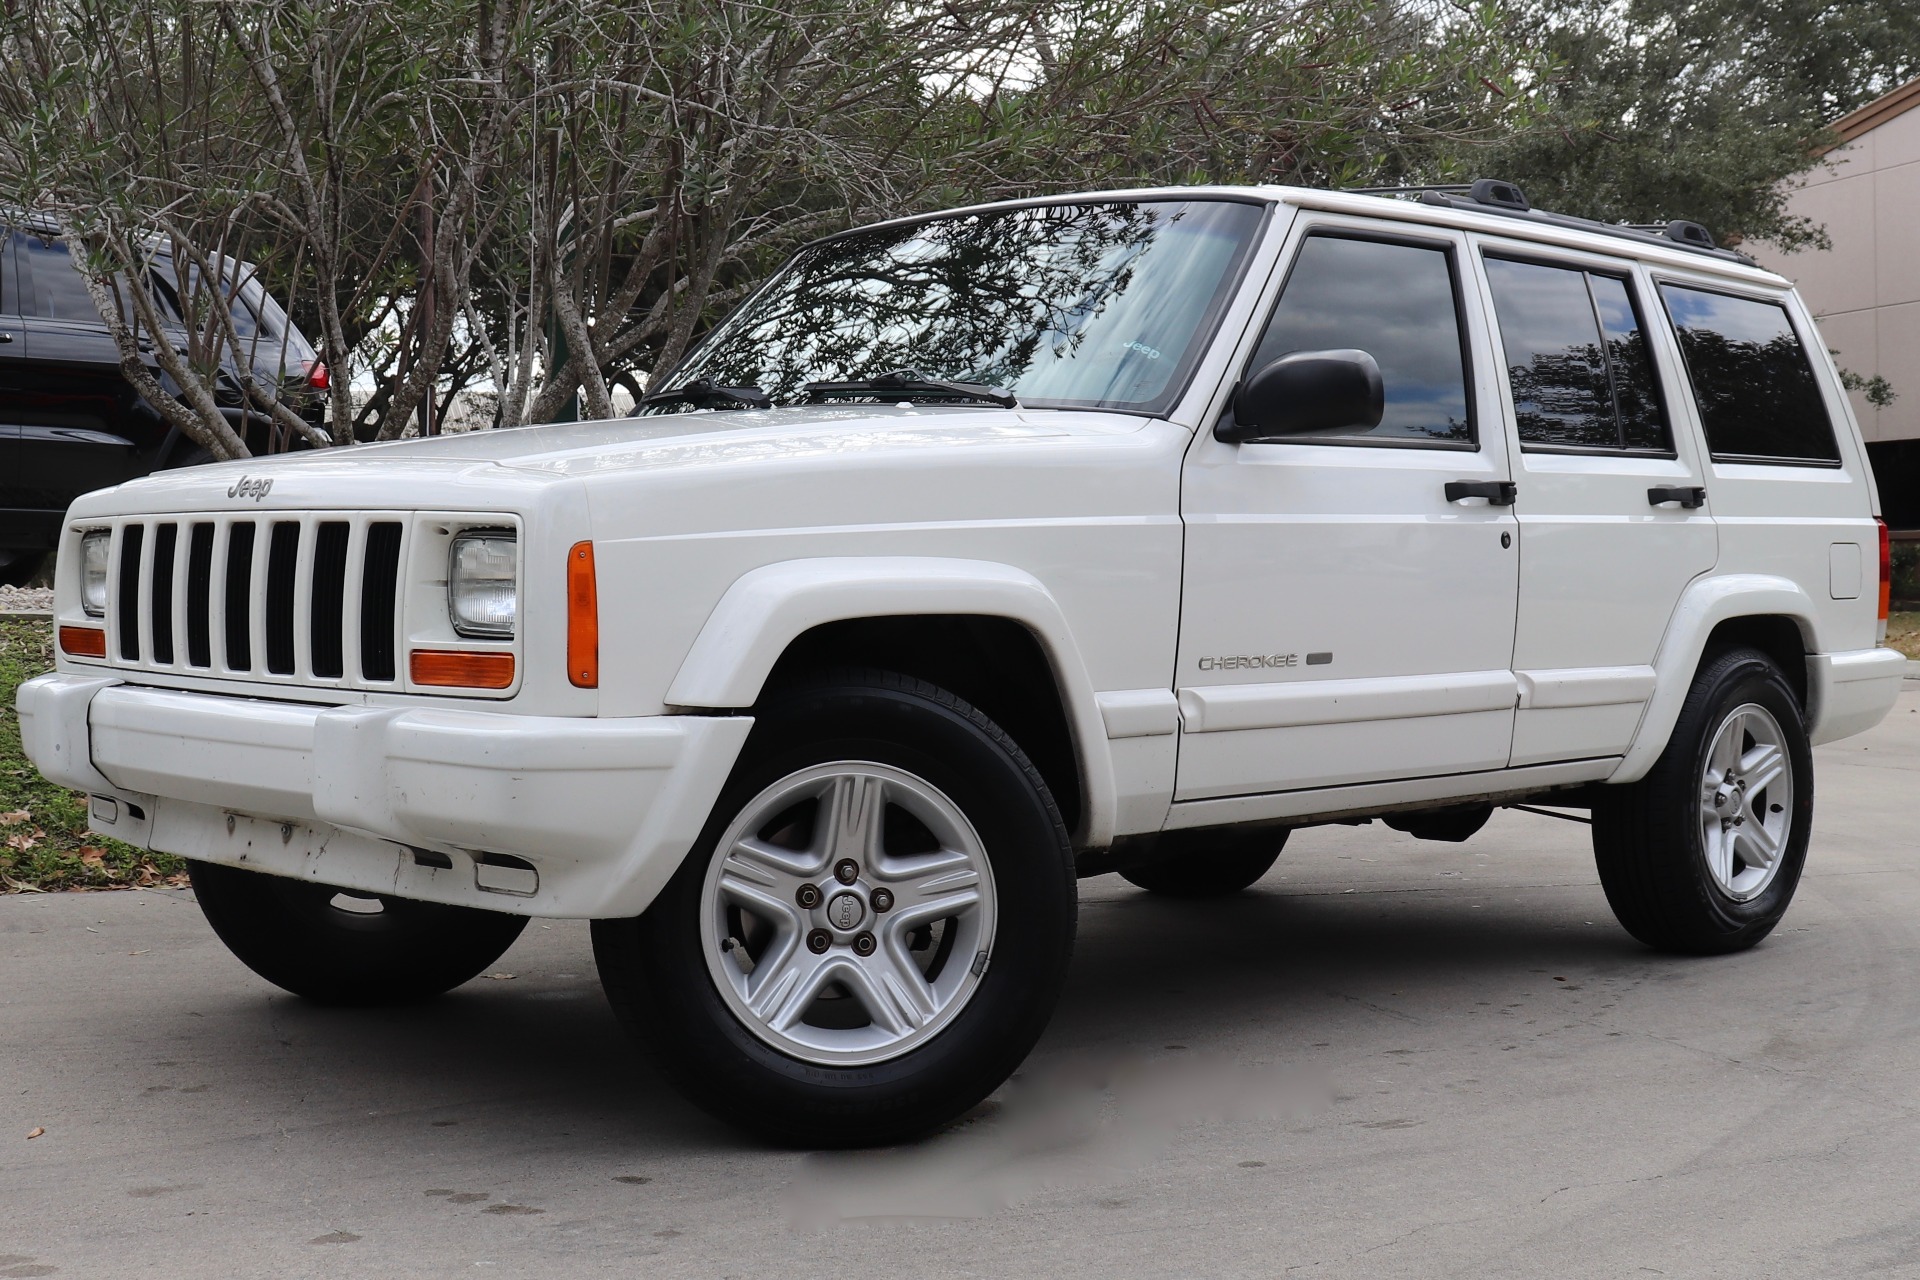 Used 2001 Jeep Cherokee Classic For Sale 6995 Select Jeeps Inc